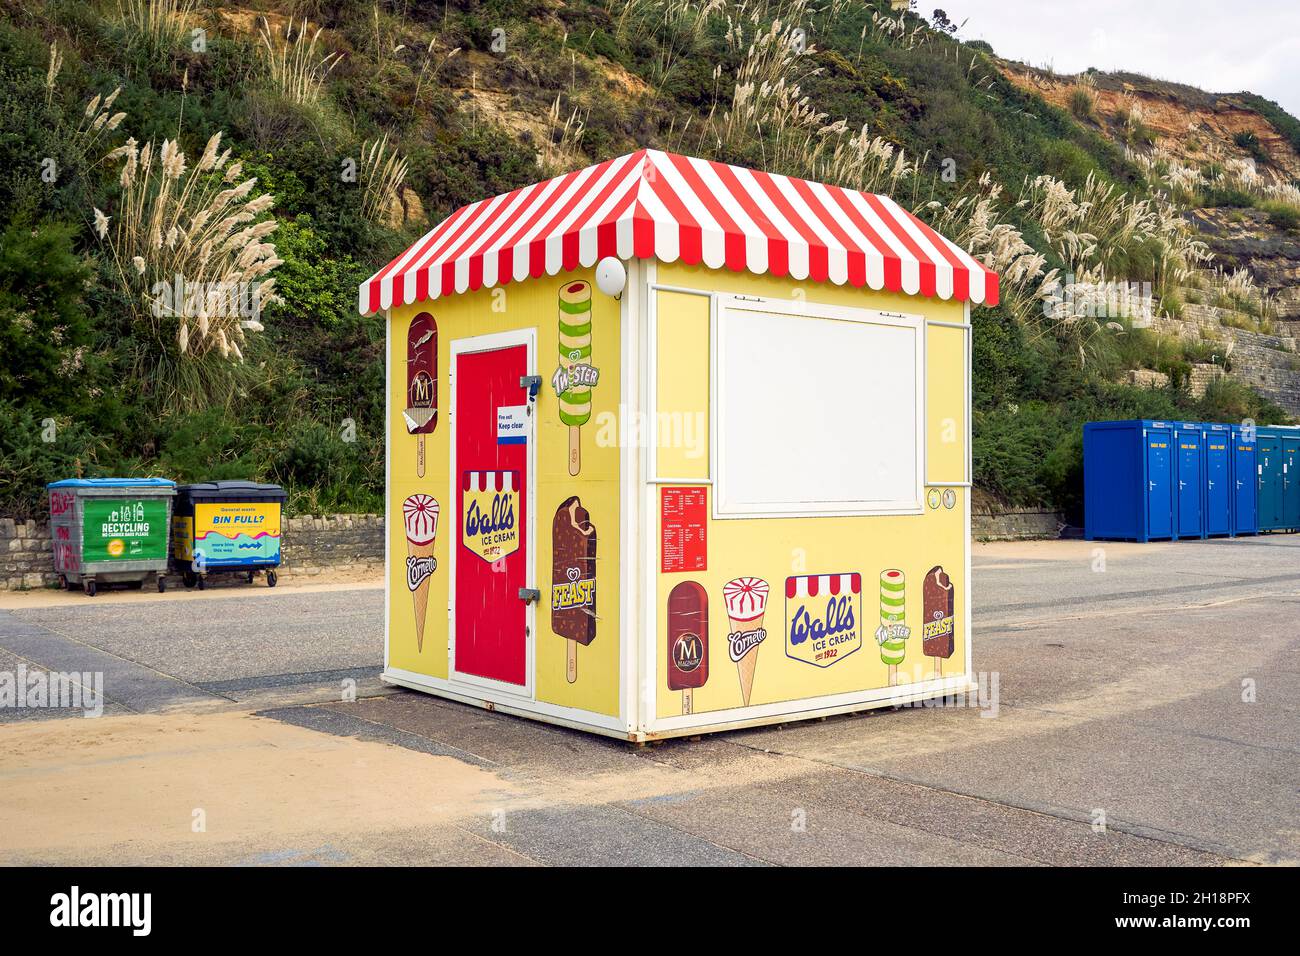 Seaside ice cream sales kiosk specialising in Walls products Stock Photo